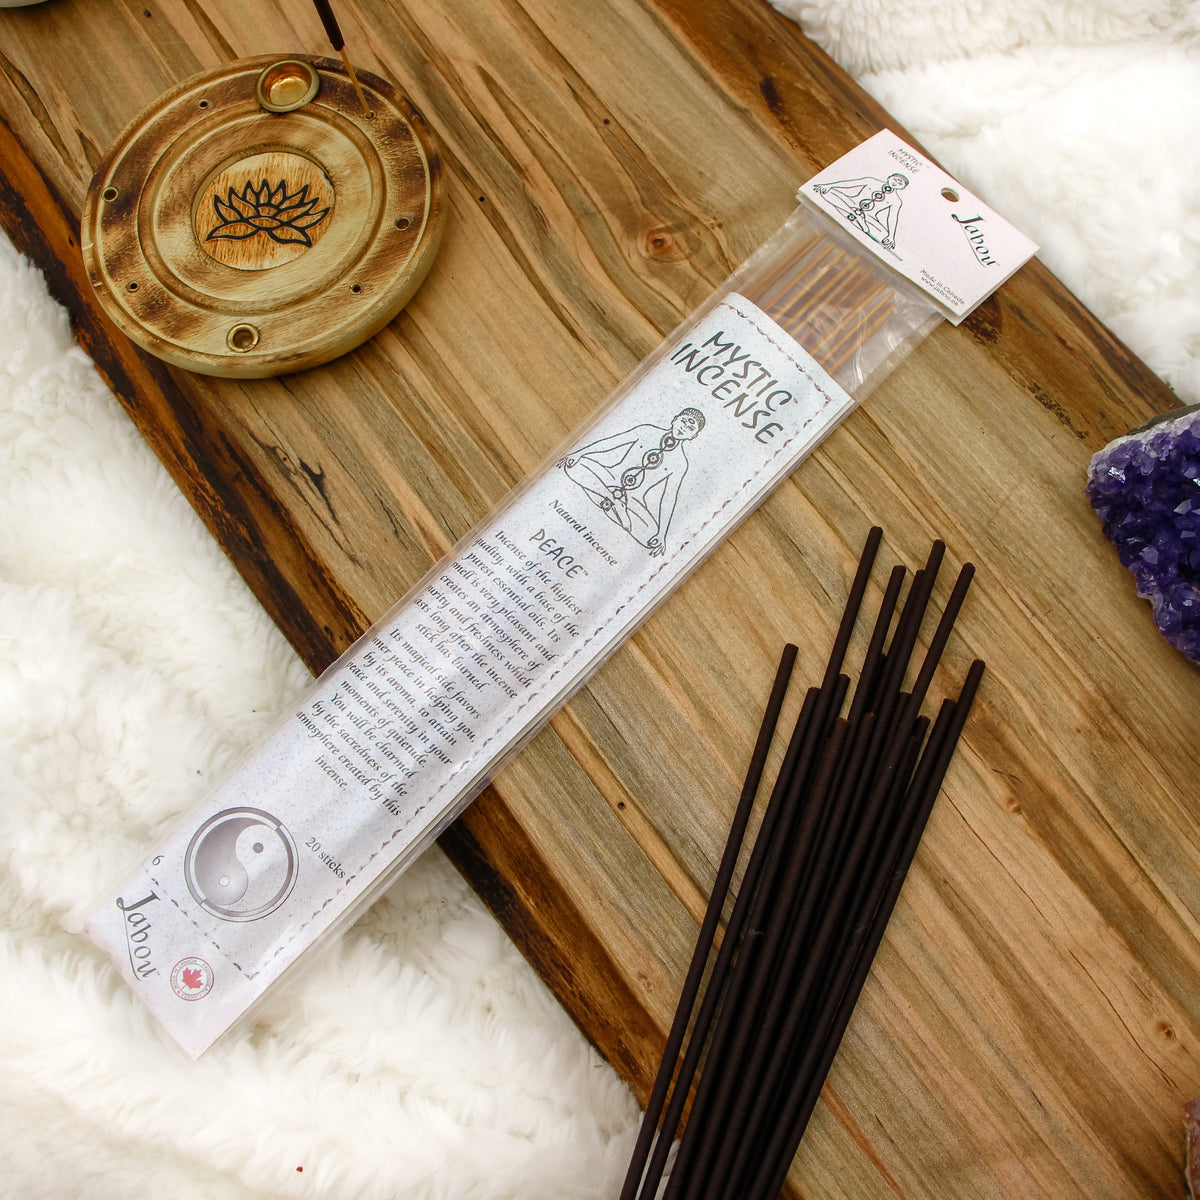 mystic incense, high quality incense, modern incense, concentration scents, aromatherapy for focus, aromatherapy for concentration, incense sticks, divination incense, protection incense, relaxation incense, relaxing incense, peace incense,